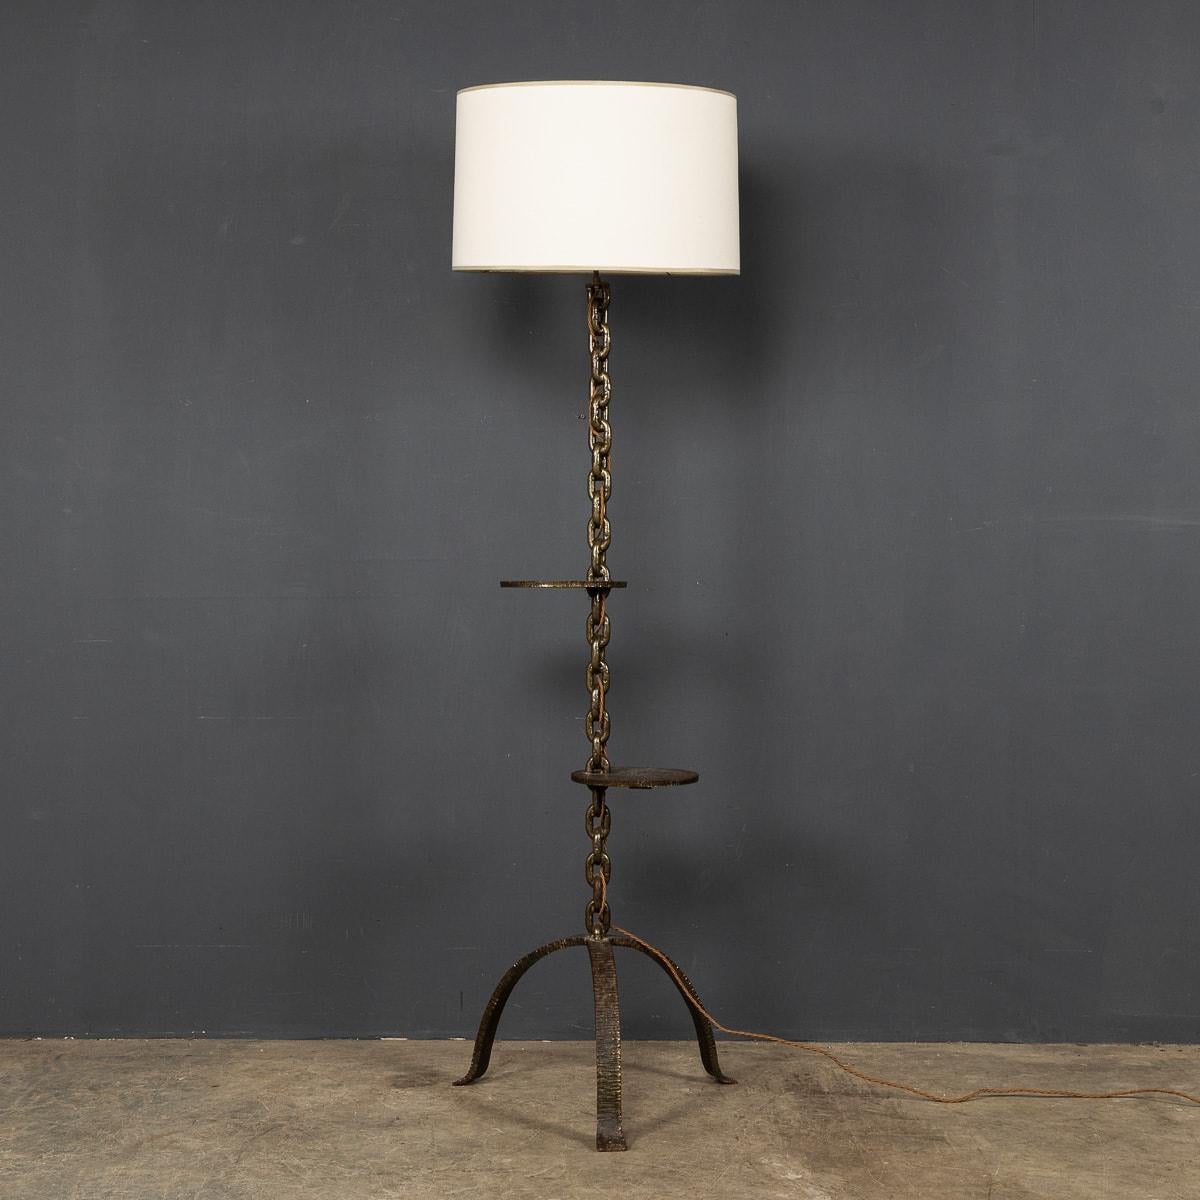 An elegant and unusual freestanding lamp with 2 integrated shelves in the stand, made in France around the 1930's. The lamp stand is made from metal taken from a French boats iron anchor chain. Feet were added along with a stylish lampshade